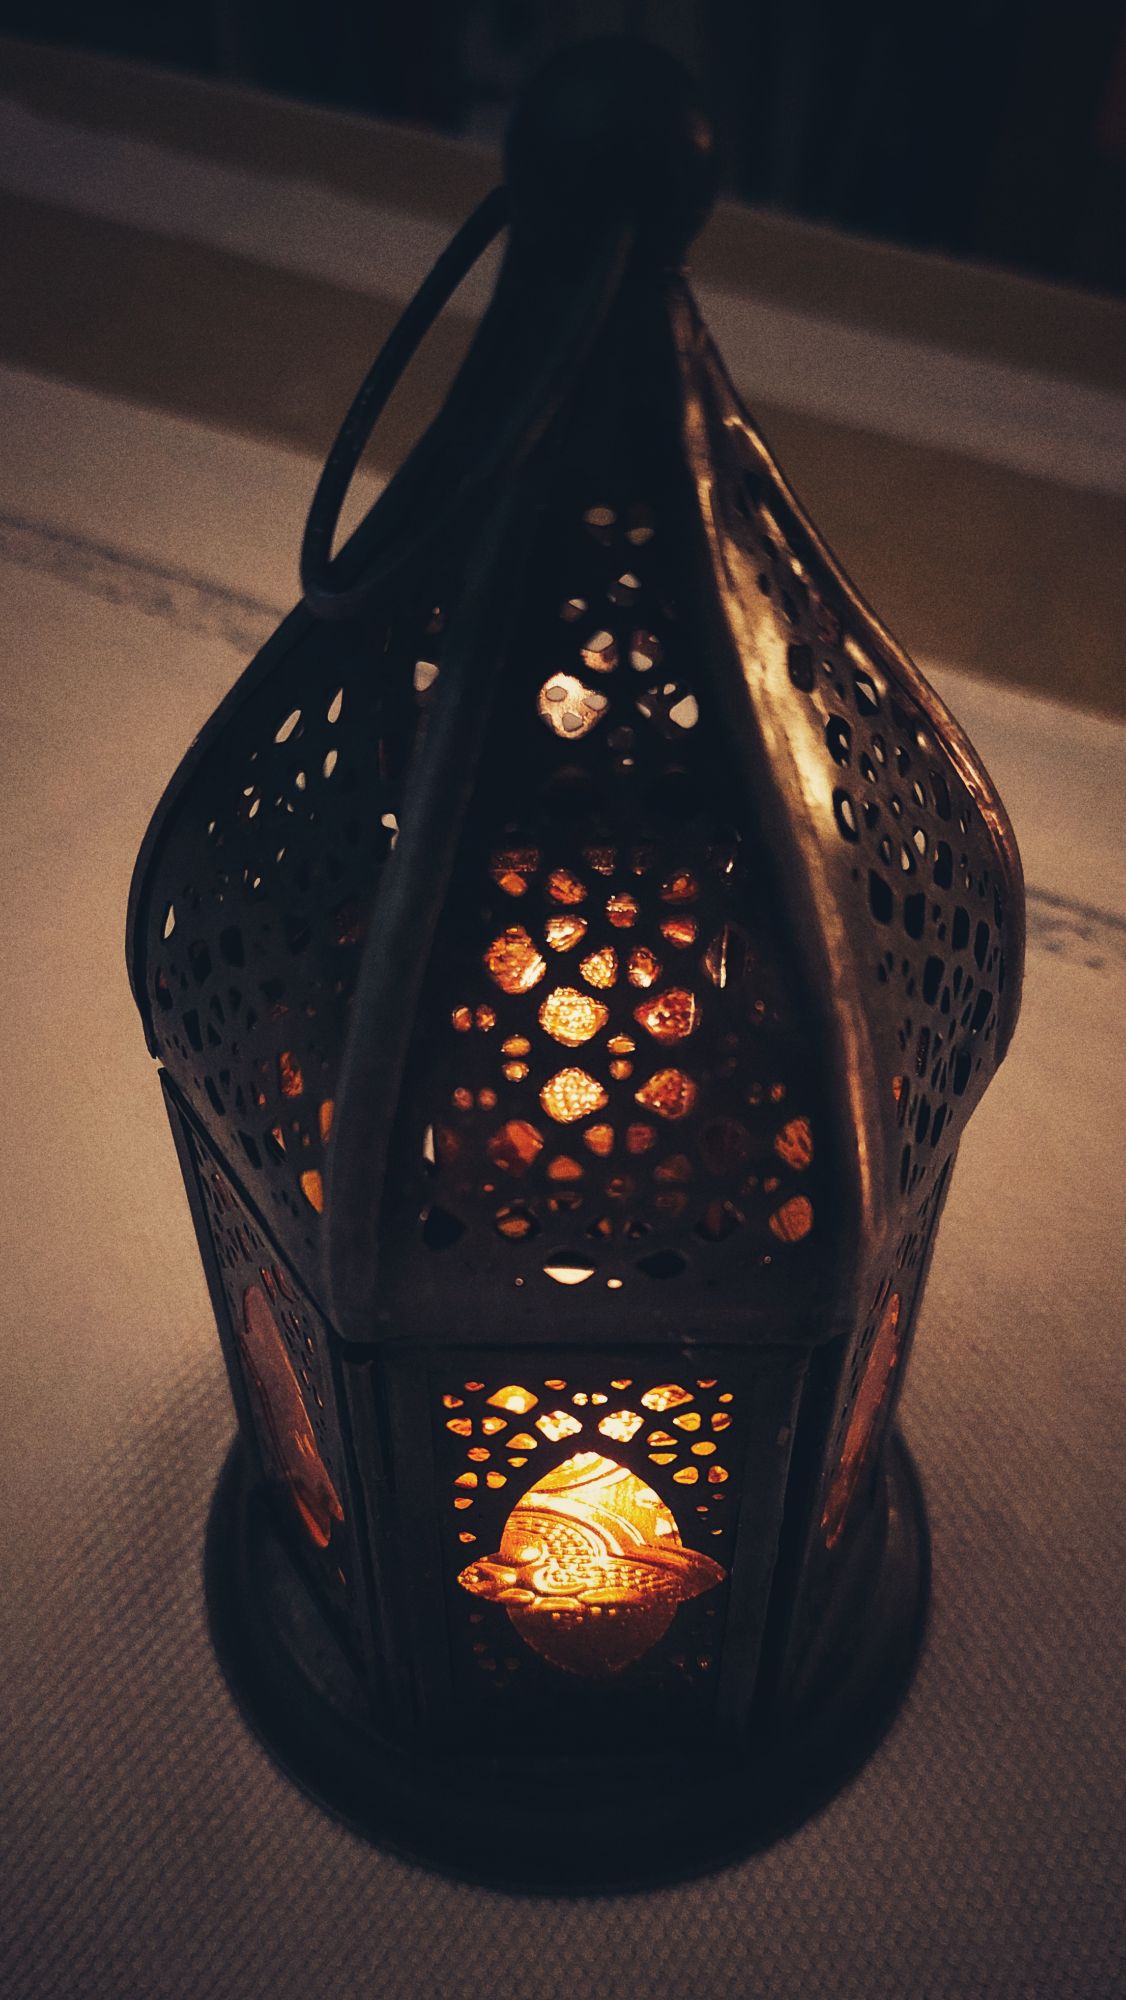 A small metal lantern with a small candle inside, placed on a tablecloth.